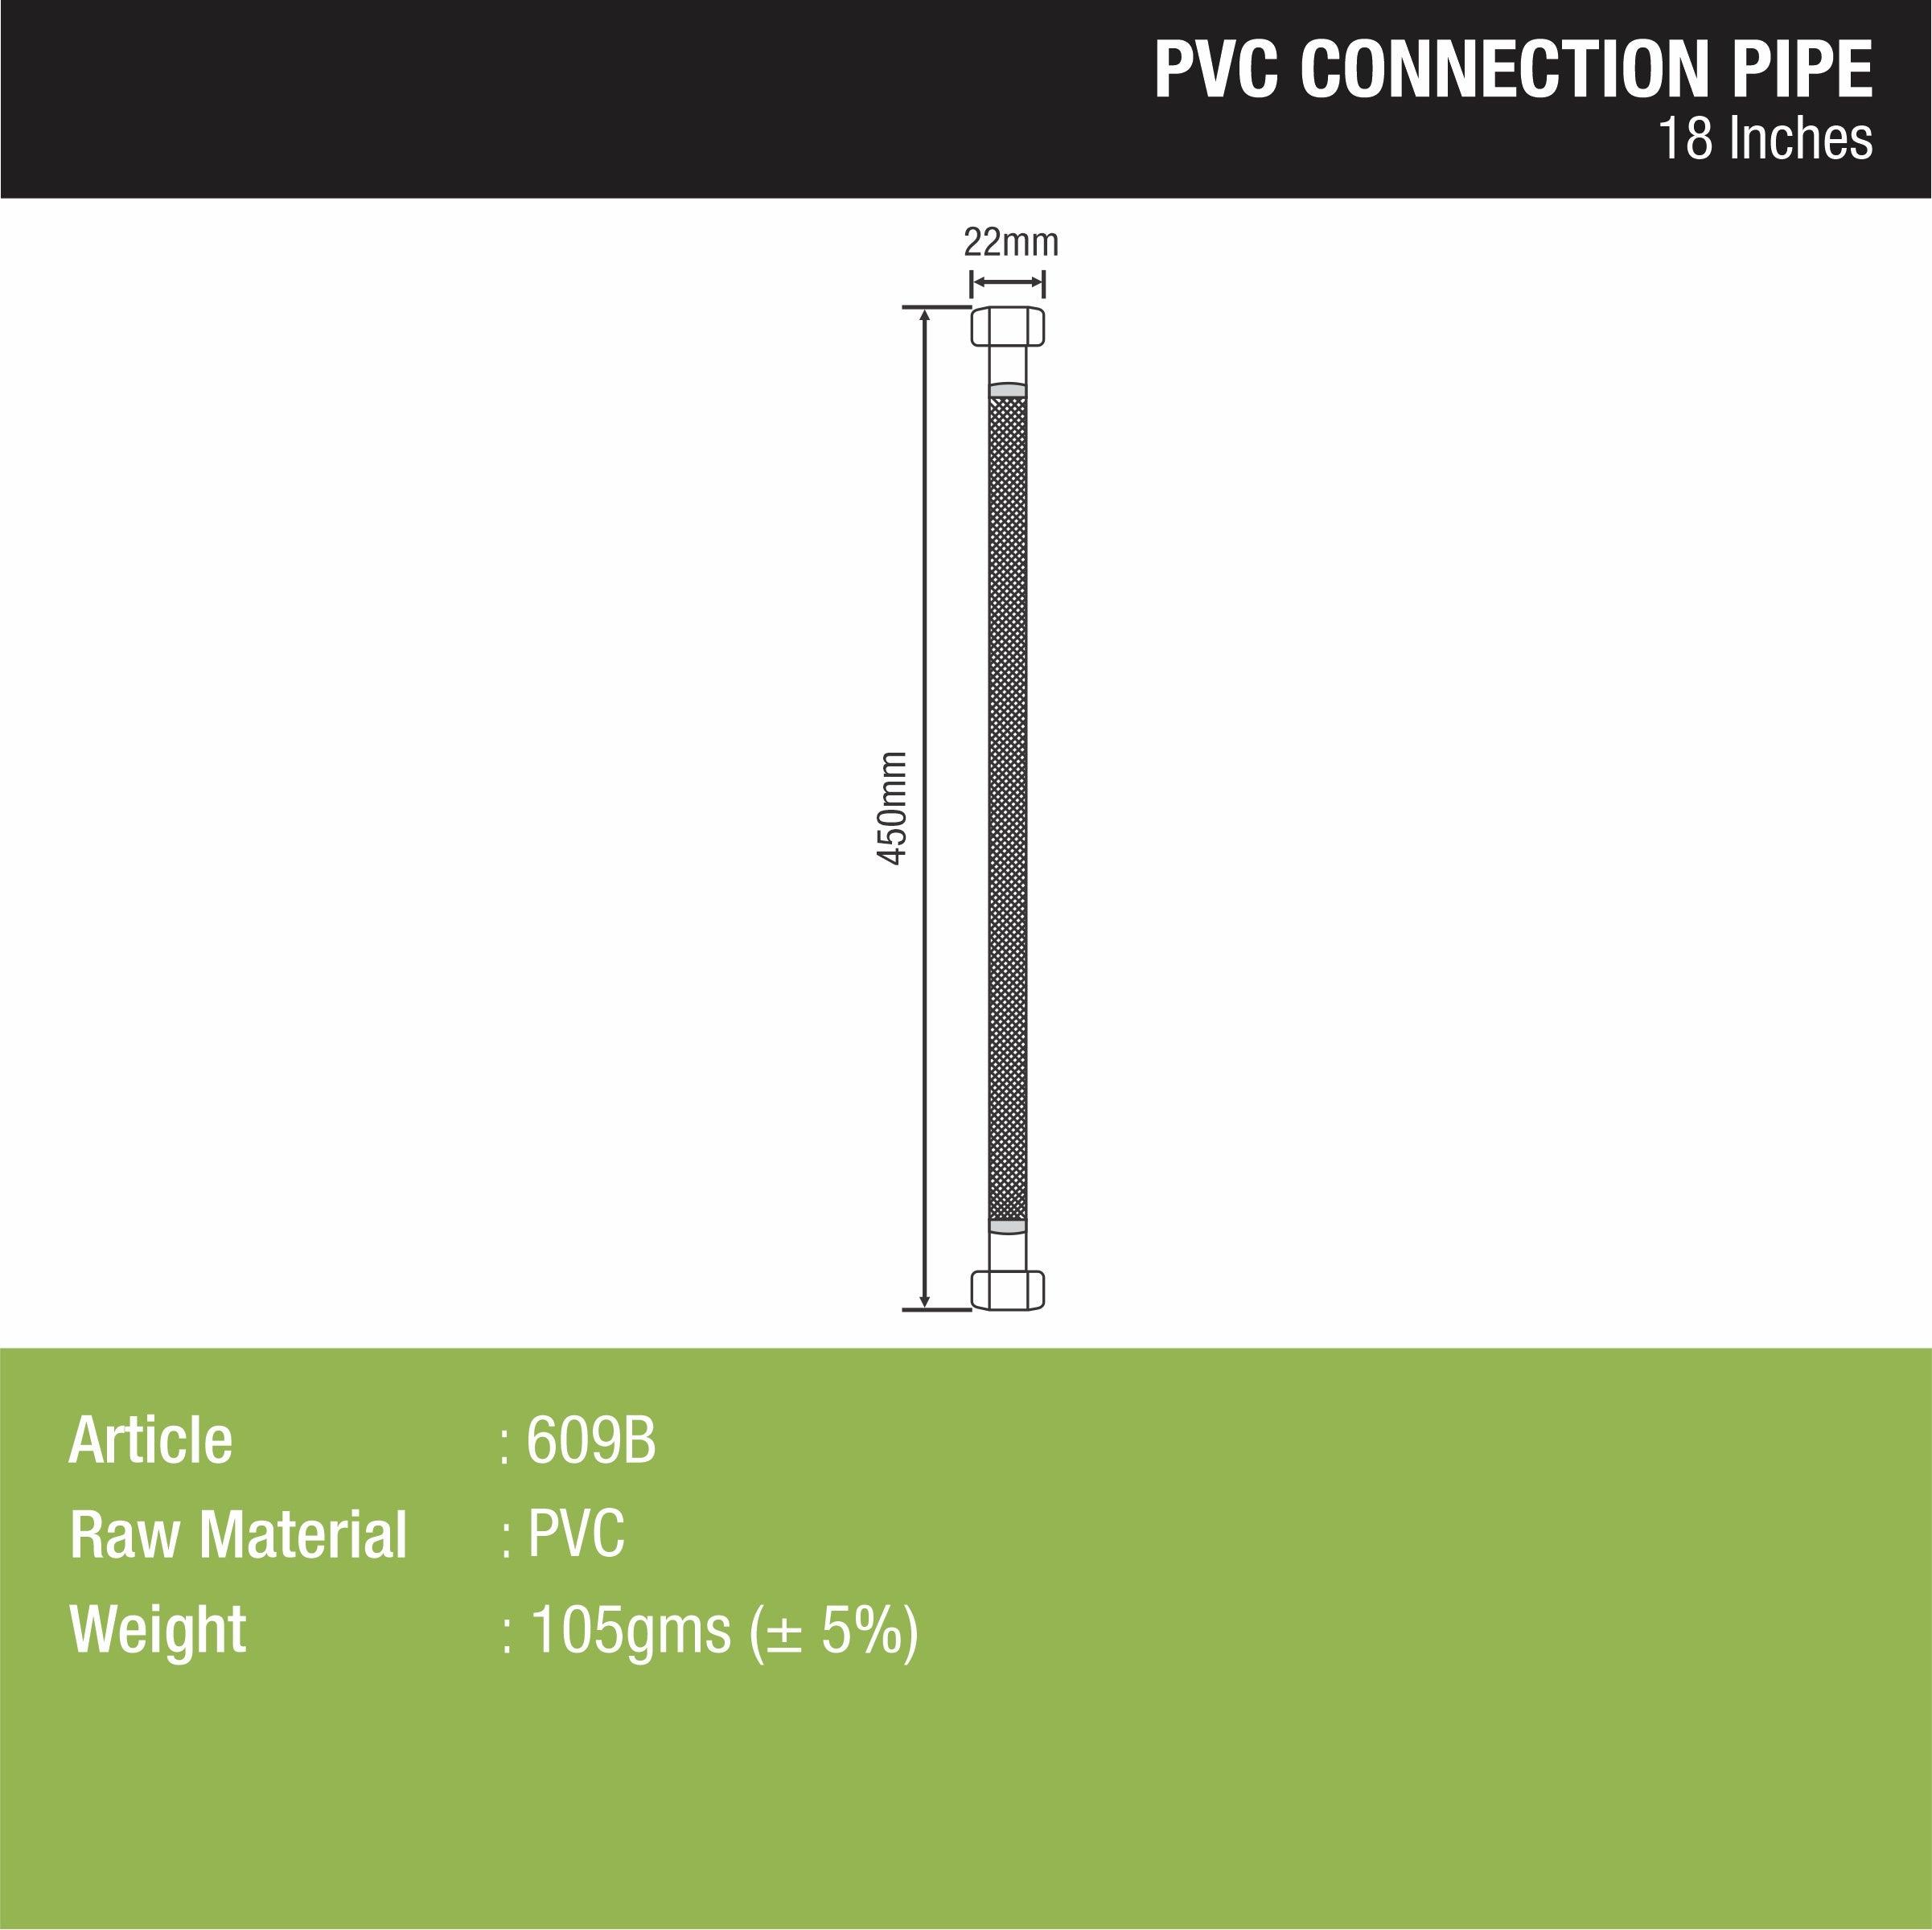 Connection Pipe PVC (18 Inches) (Pack of 2) sizes and dimensions